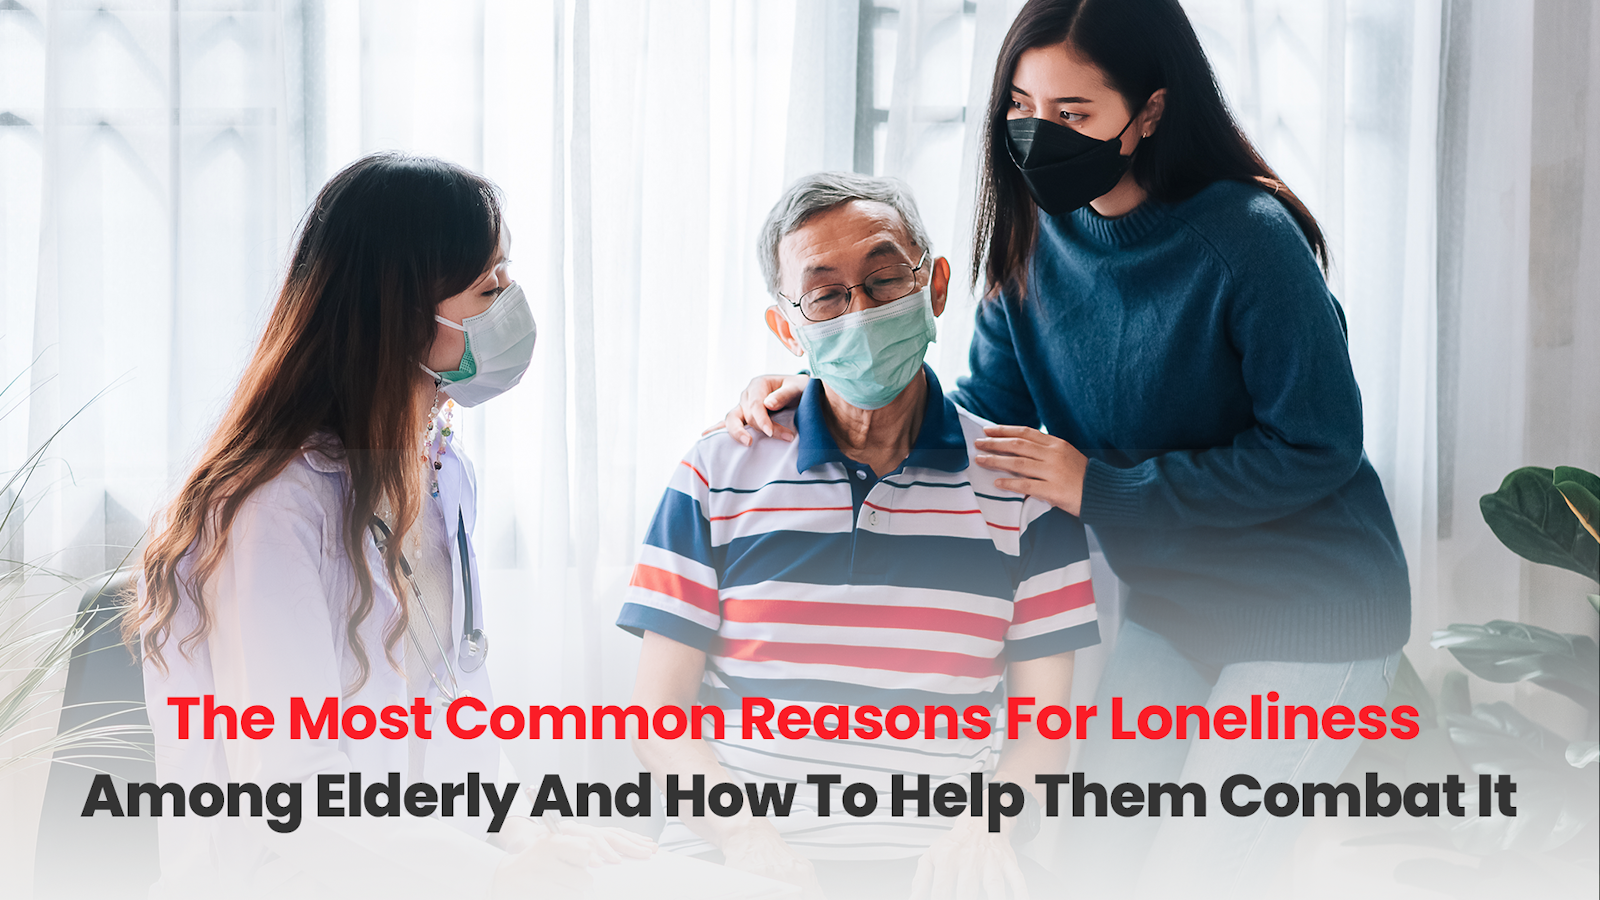 The Most Common Reasons For Loneliness Among Elderly